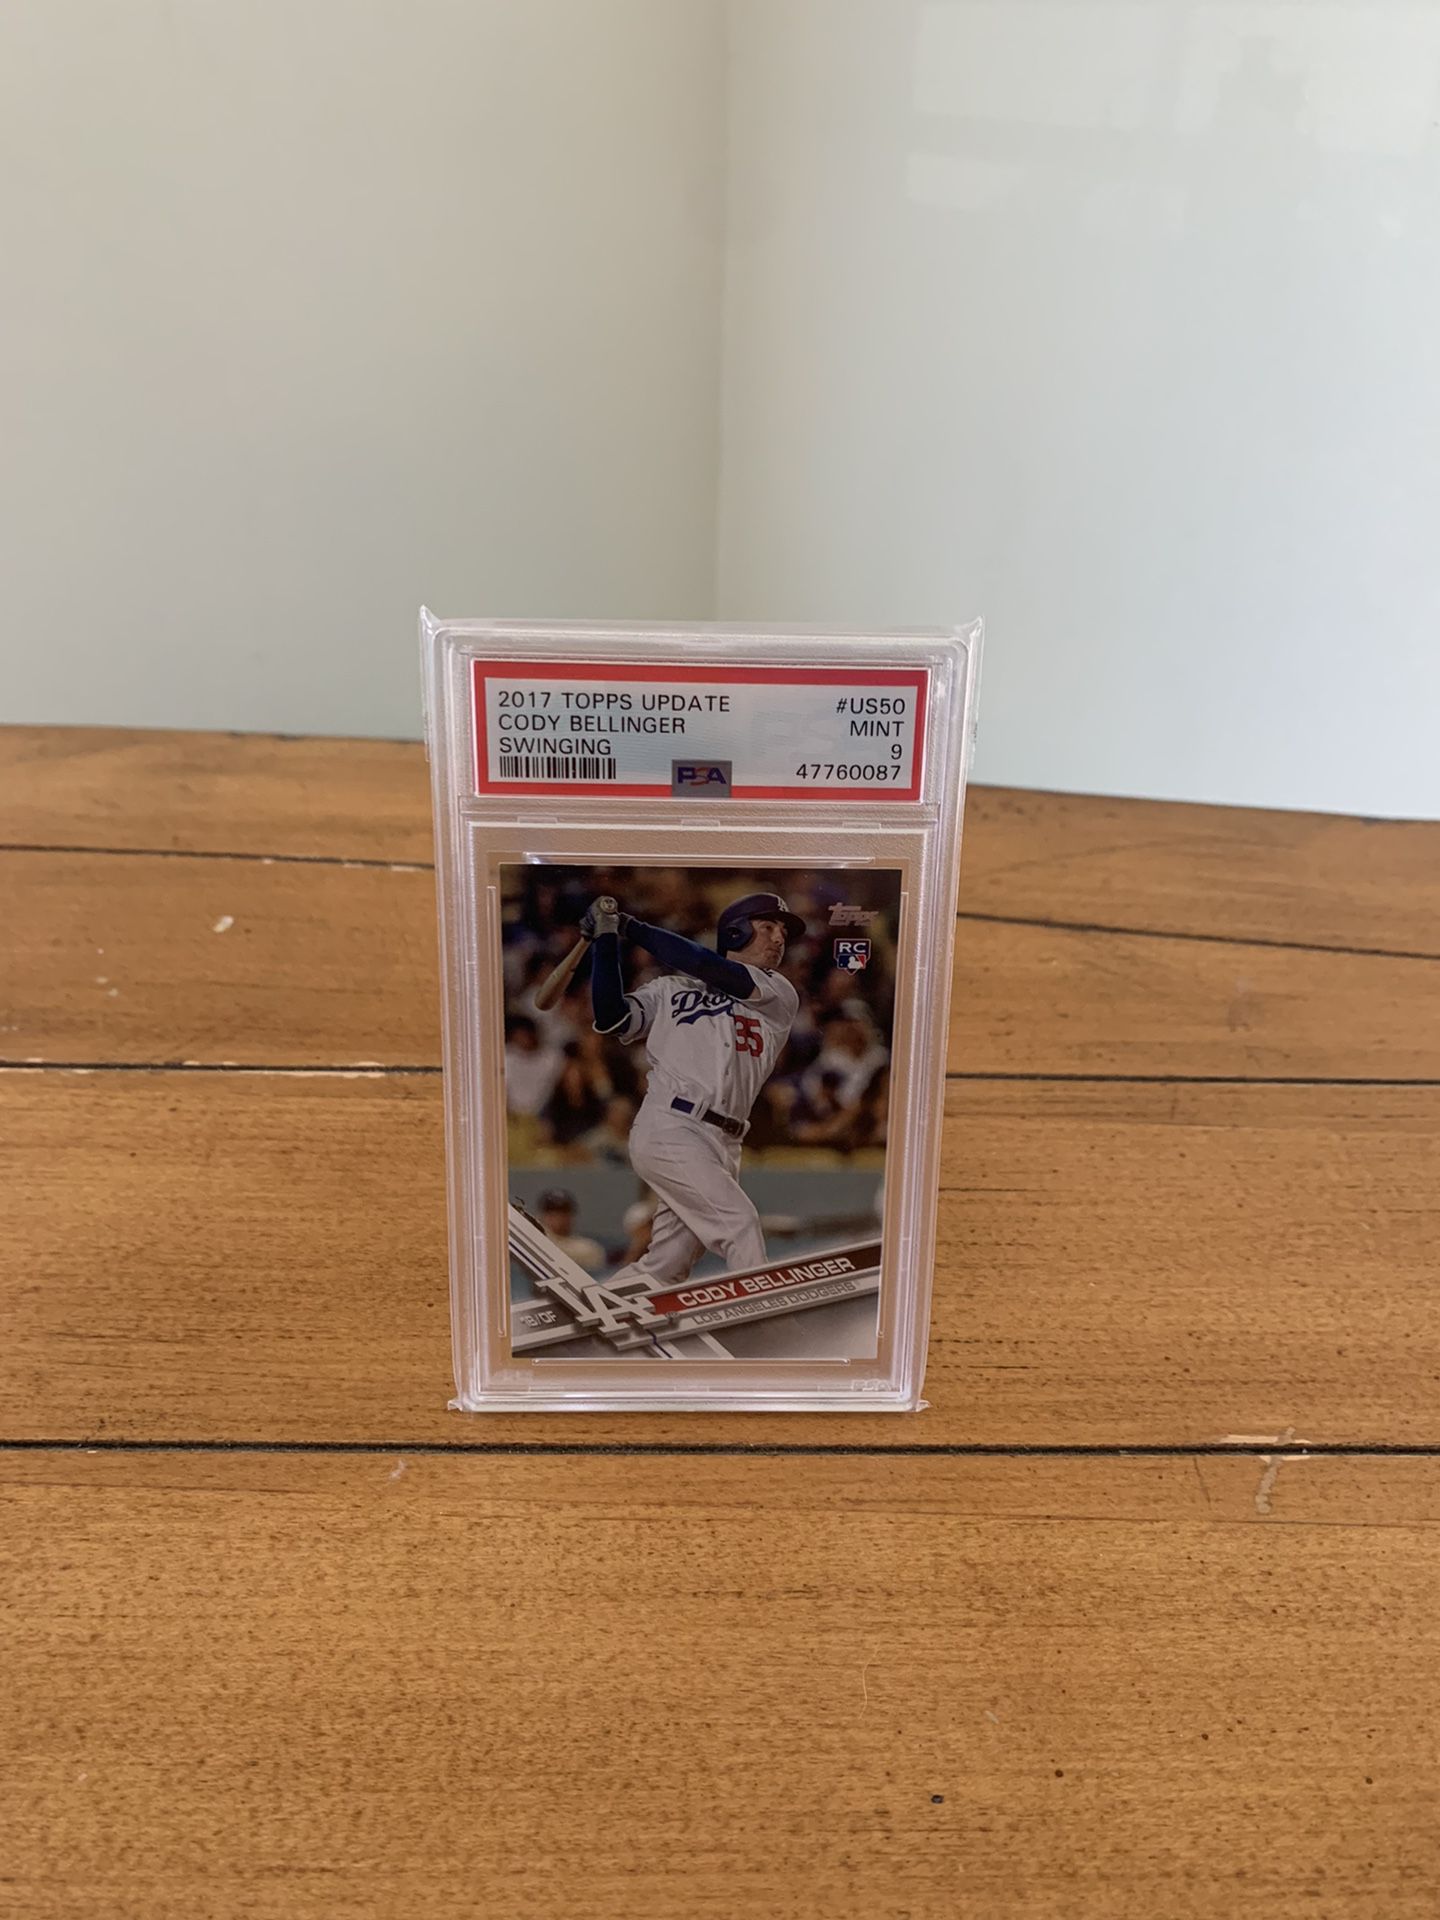 Dodgers Cody Bellinger Rookie Card for Sale in Paramount, CA - OfferUp